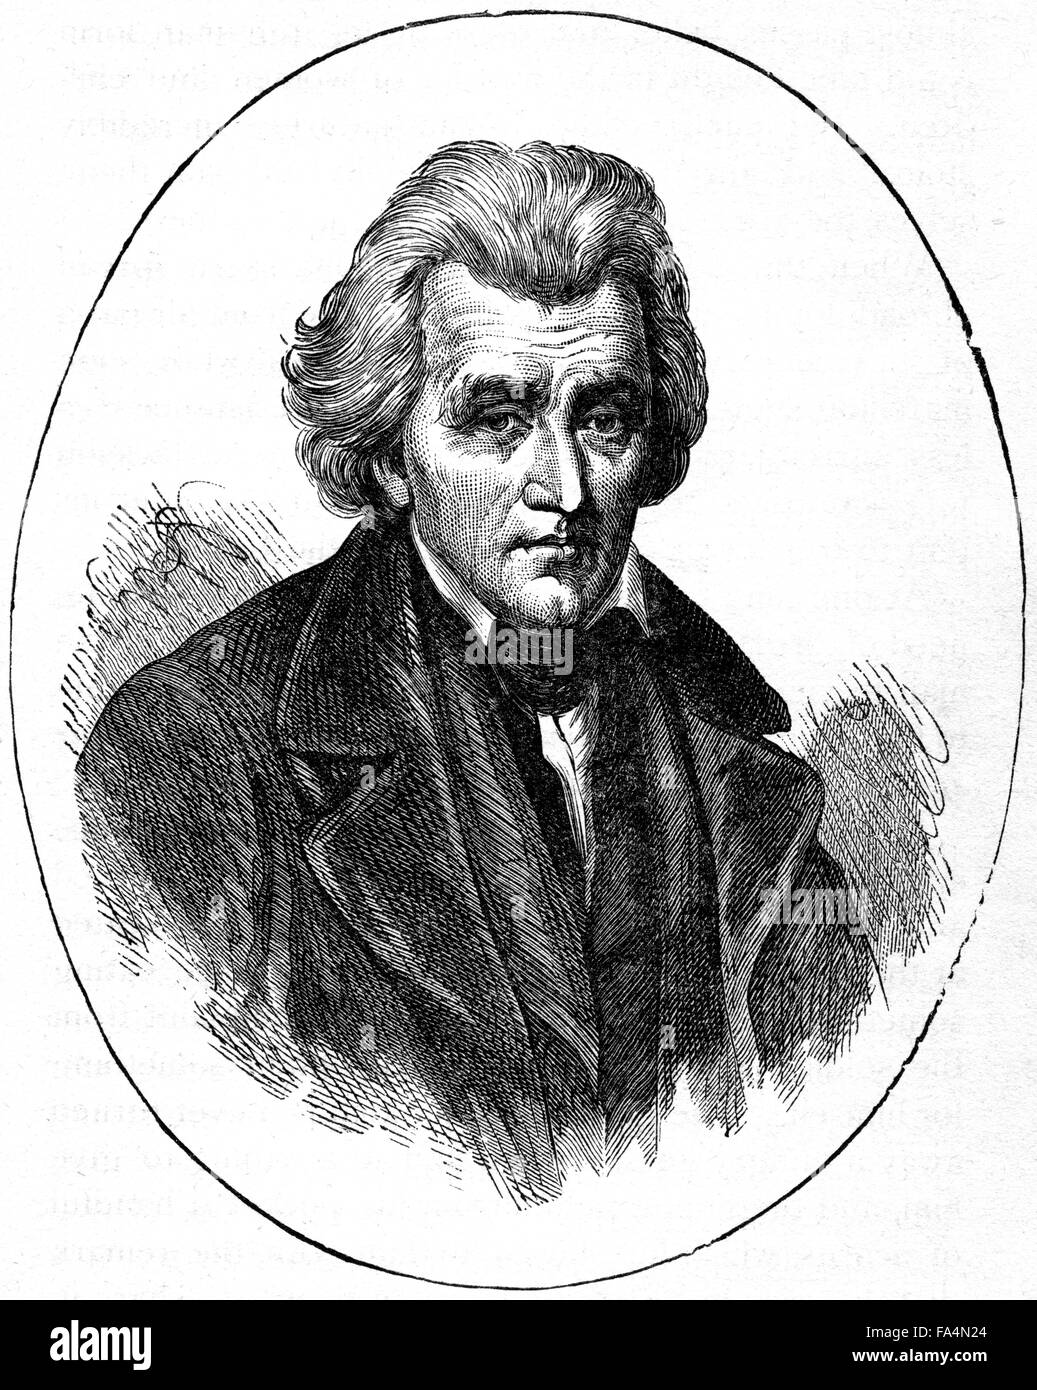 Andrew Jackson (1767-1845), “Old Hickory”,  Seventh President of the United States, Book Illustration from “Indian Horrors or Massacres of the Red Men”, by Henry Davenport Northrop, 1891 Stock Photo